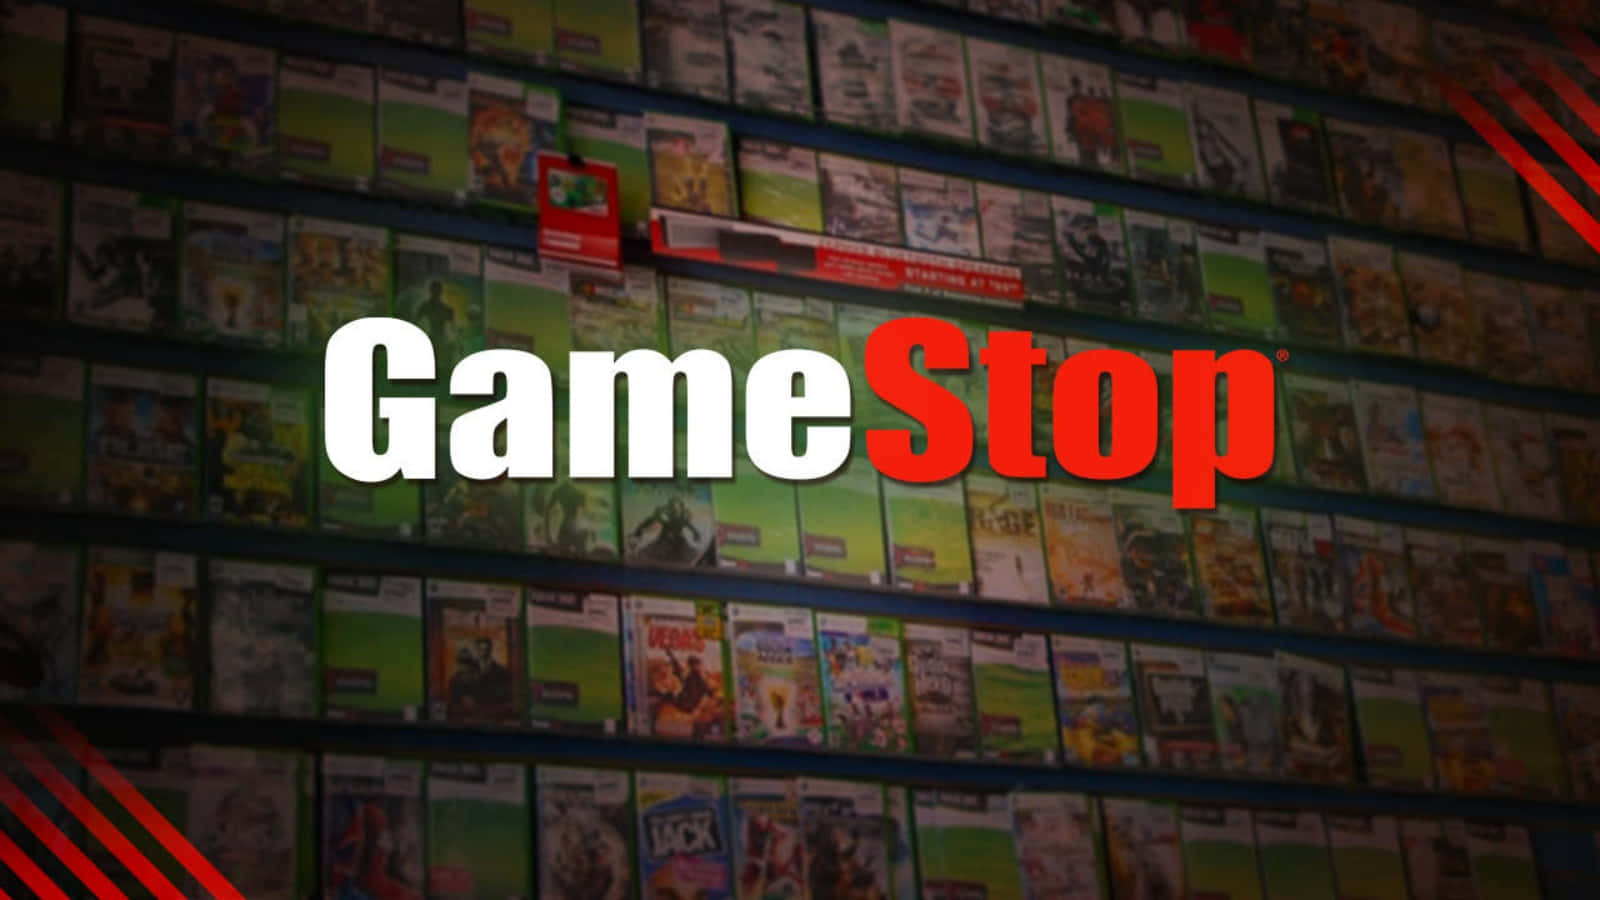 Get an edge on gaming by shopping at your local Gamestop!